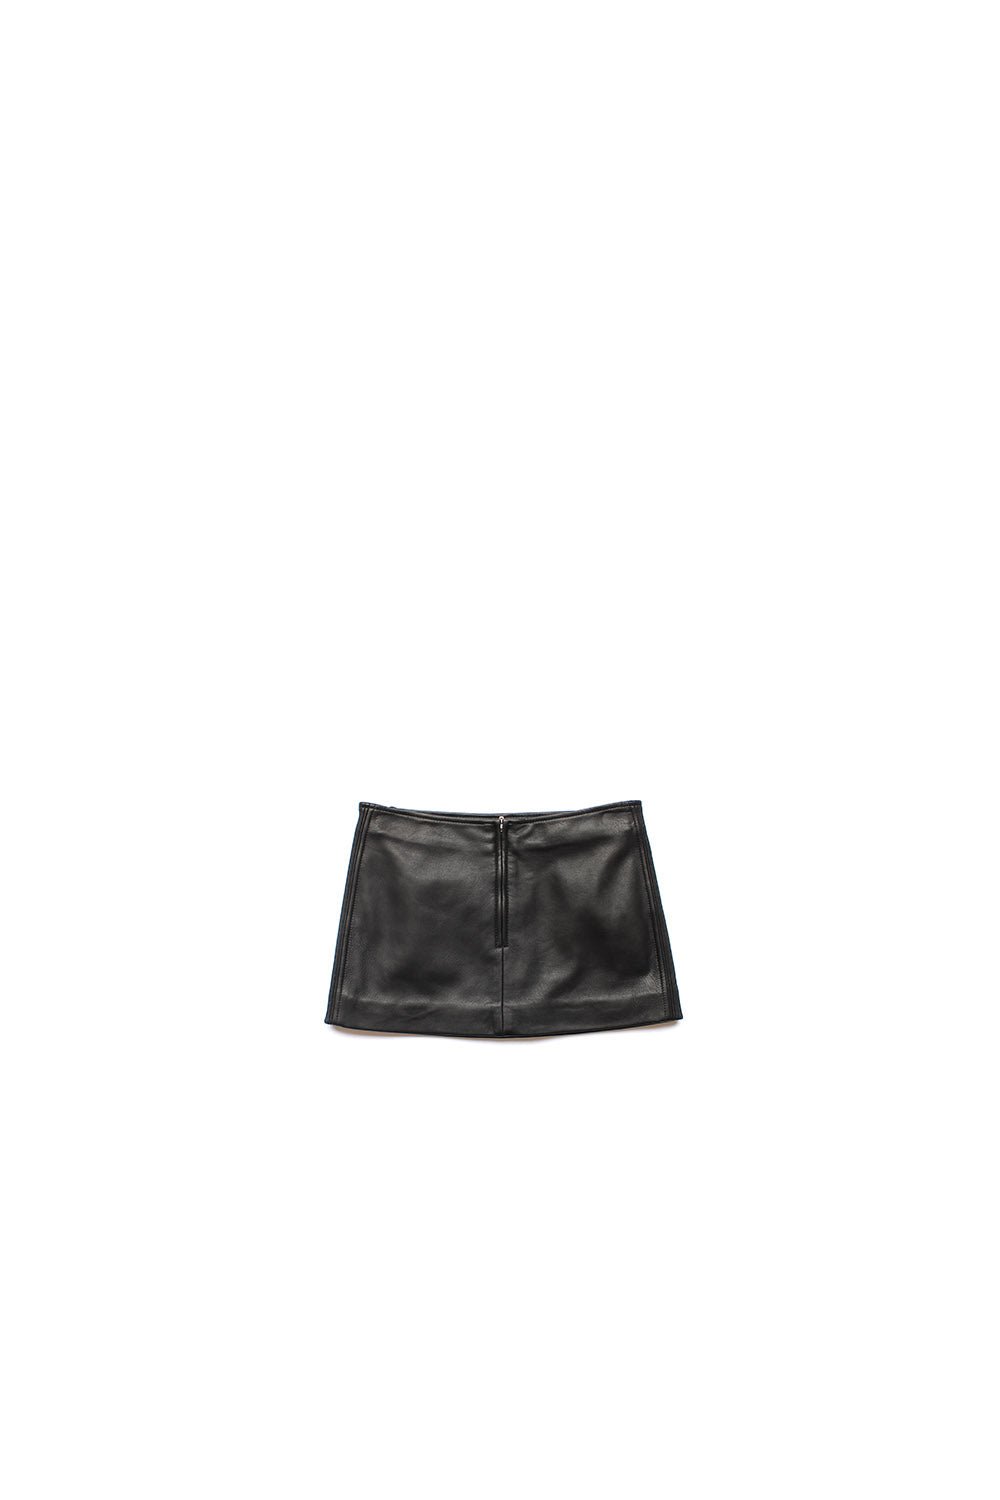 MY BUTT MINISKIRT Leather skirt, rear central zip closure. Made in Italy HTC LOS ANGELES